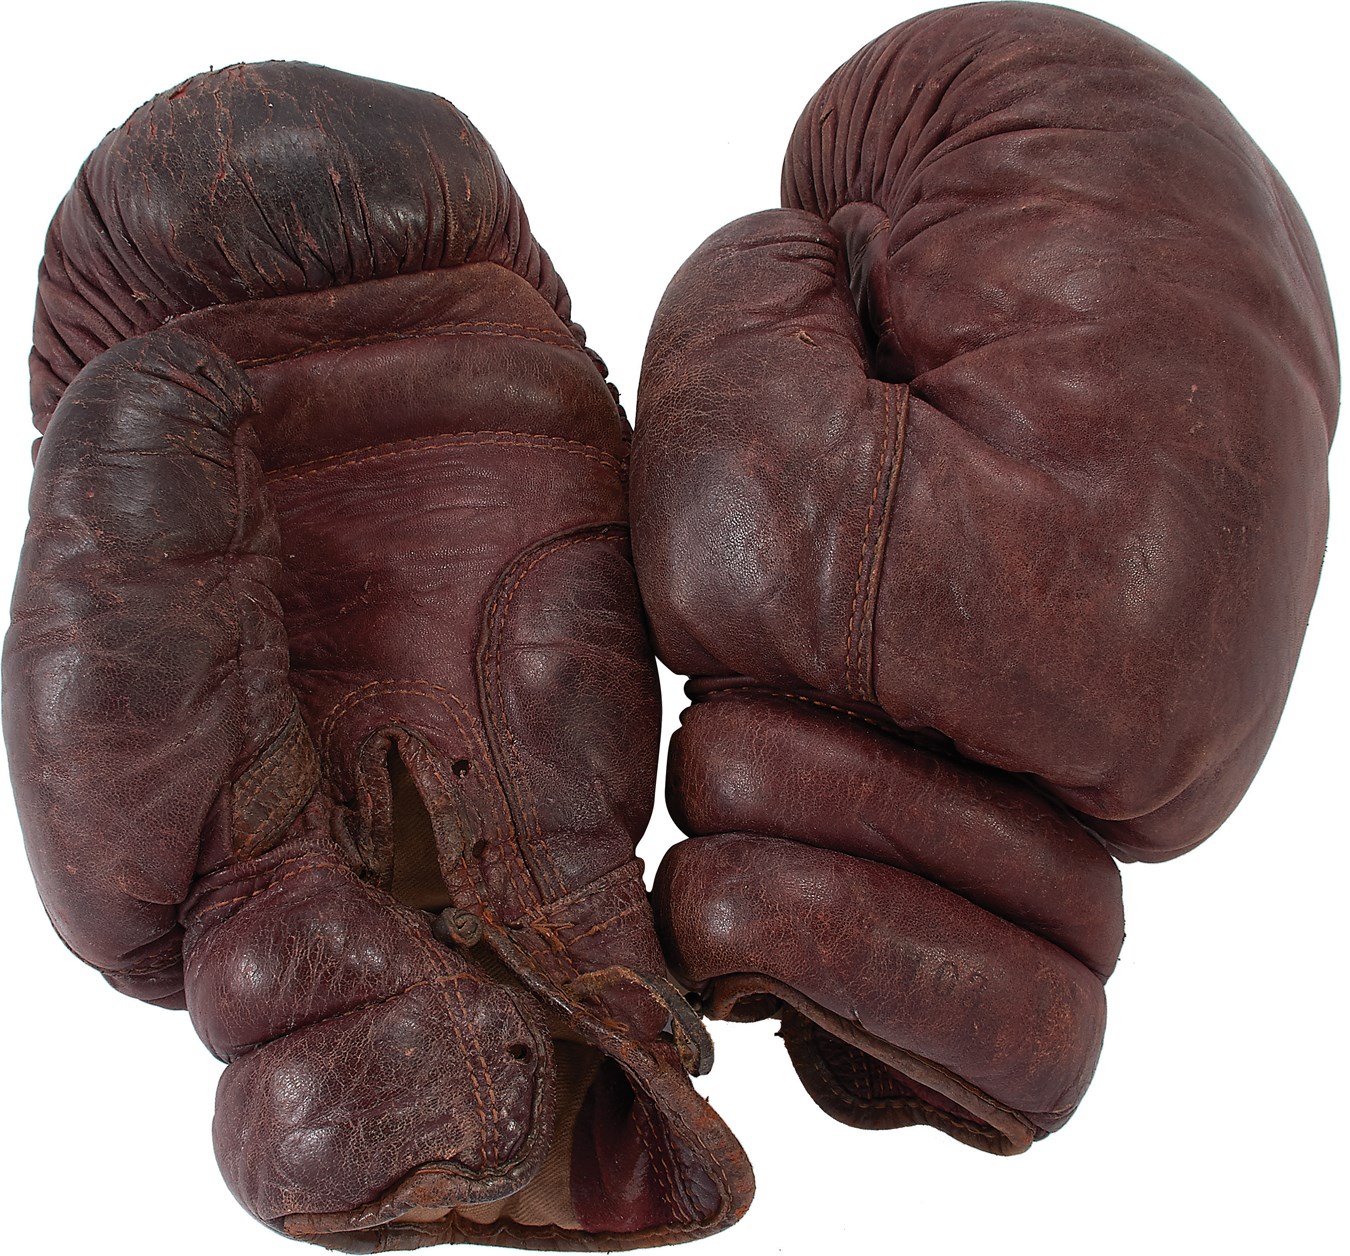 Muhammad Ali & Boxing - 1930s Nathan Mann Worn Boxing Gloves and Original Oil Painting - Fought Joe Louis for Title